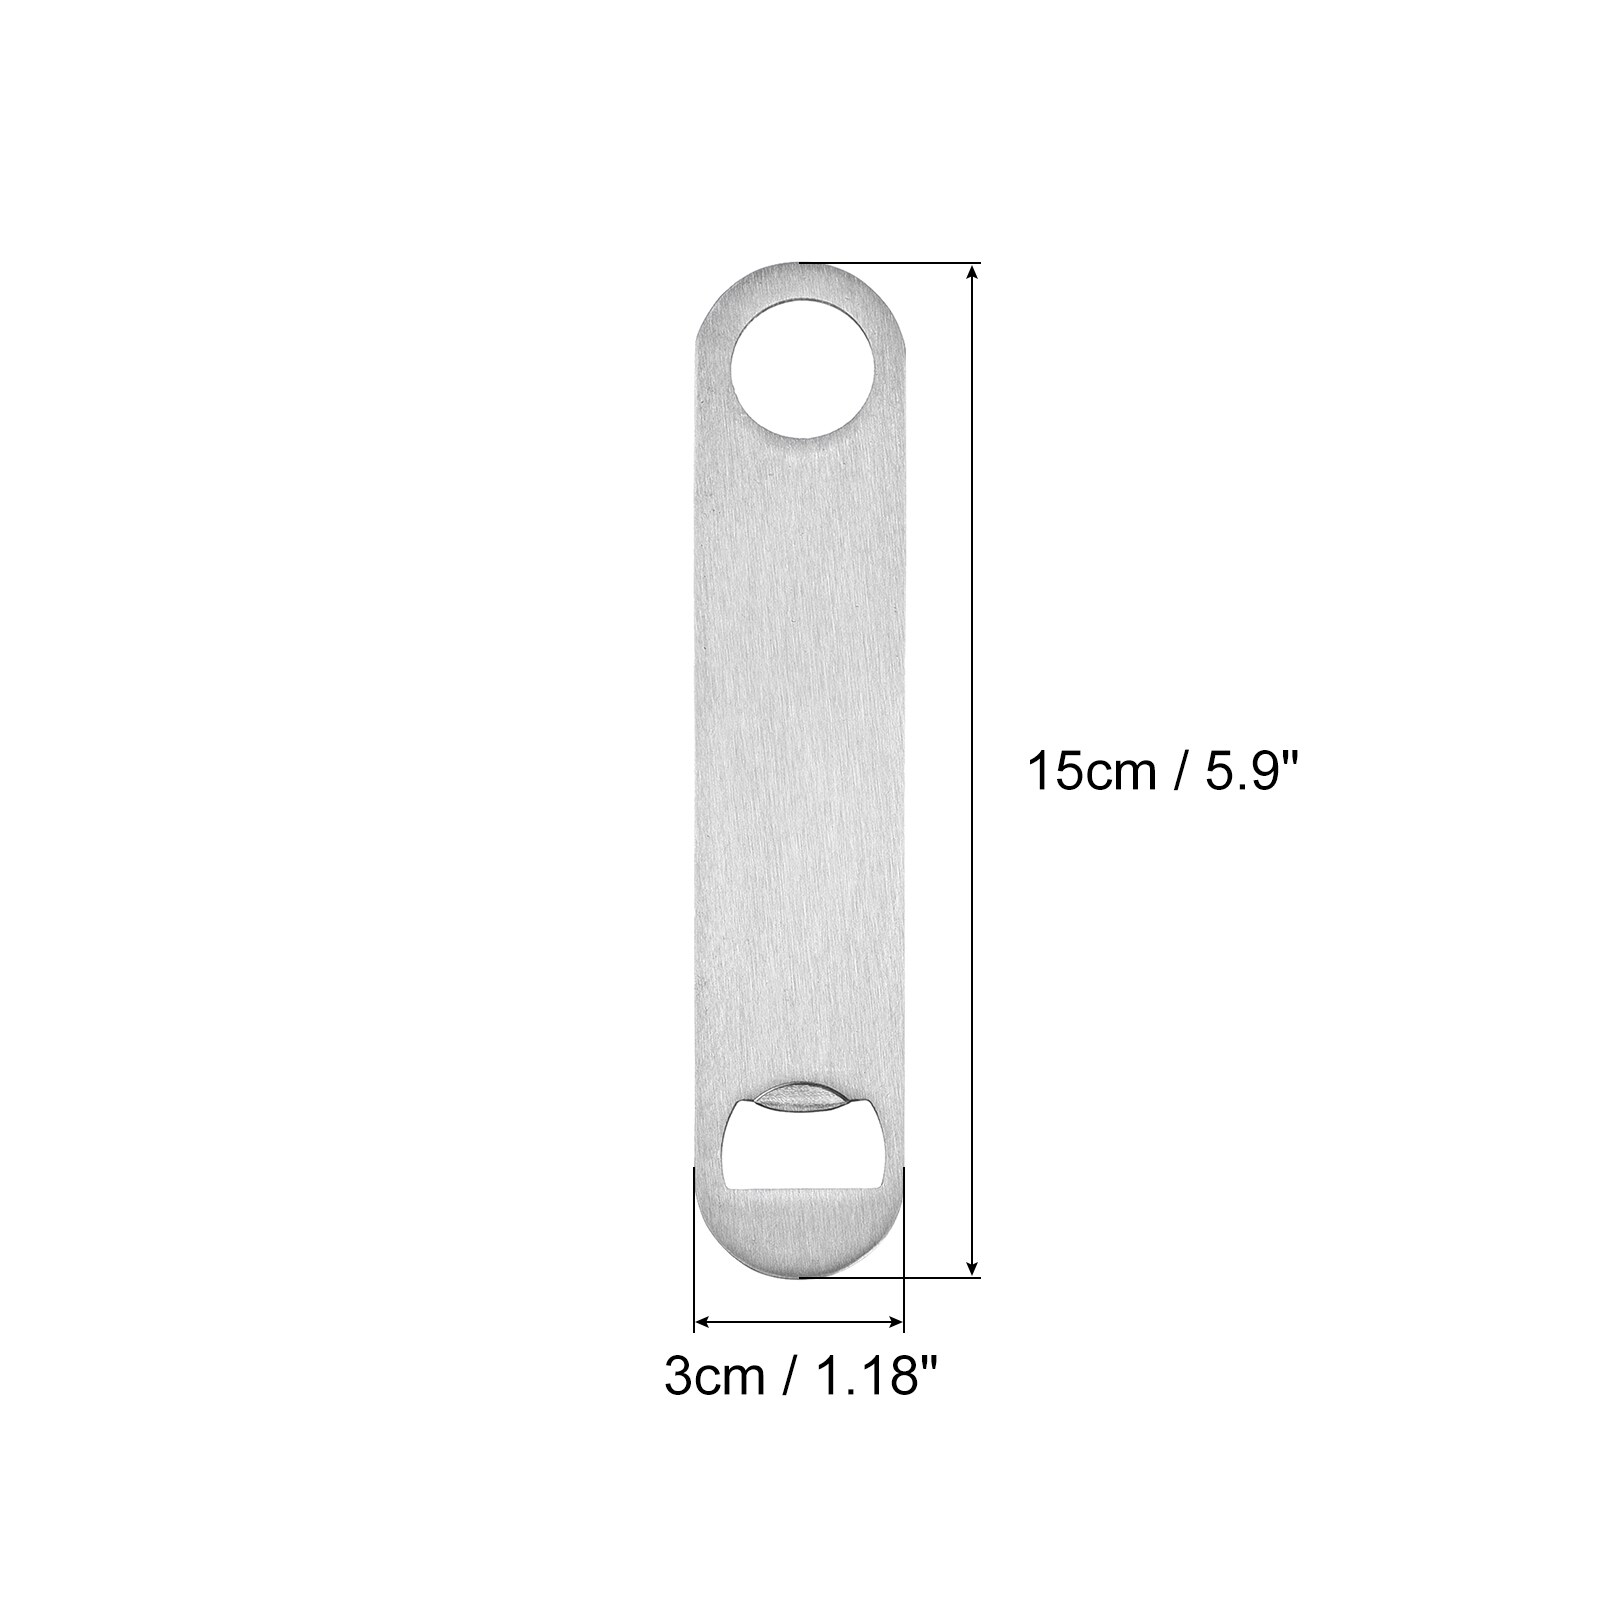 https://ak1.ostkcdn.com/images/products/is/images/direct/a5a67222fafc5a51361484156e3658d2aea6bbd9/2pcs-Stainless-Steel-Flat-Beer-Bottle-Openers-for-Beer-Lovers%2C-Silver.jpg